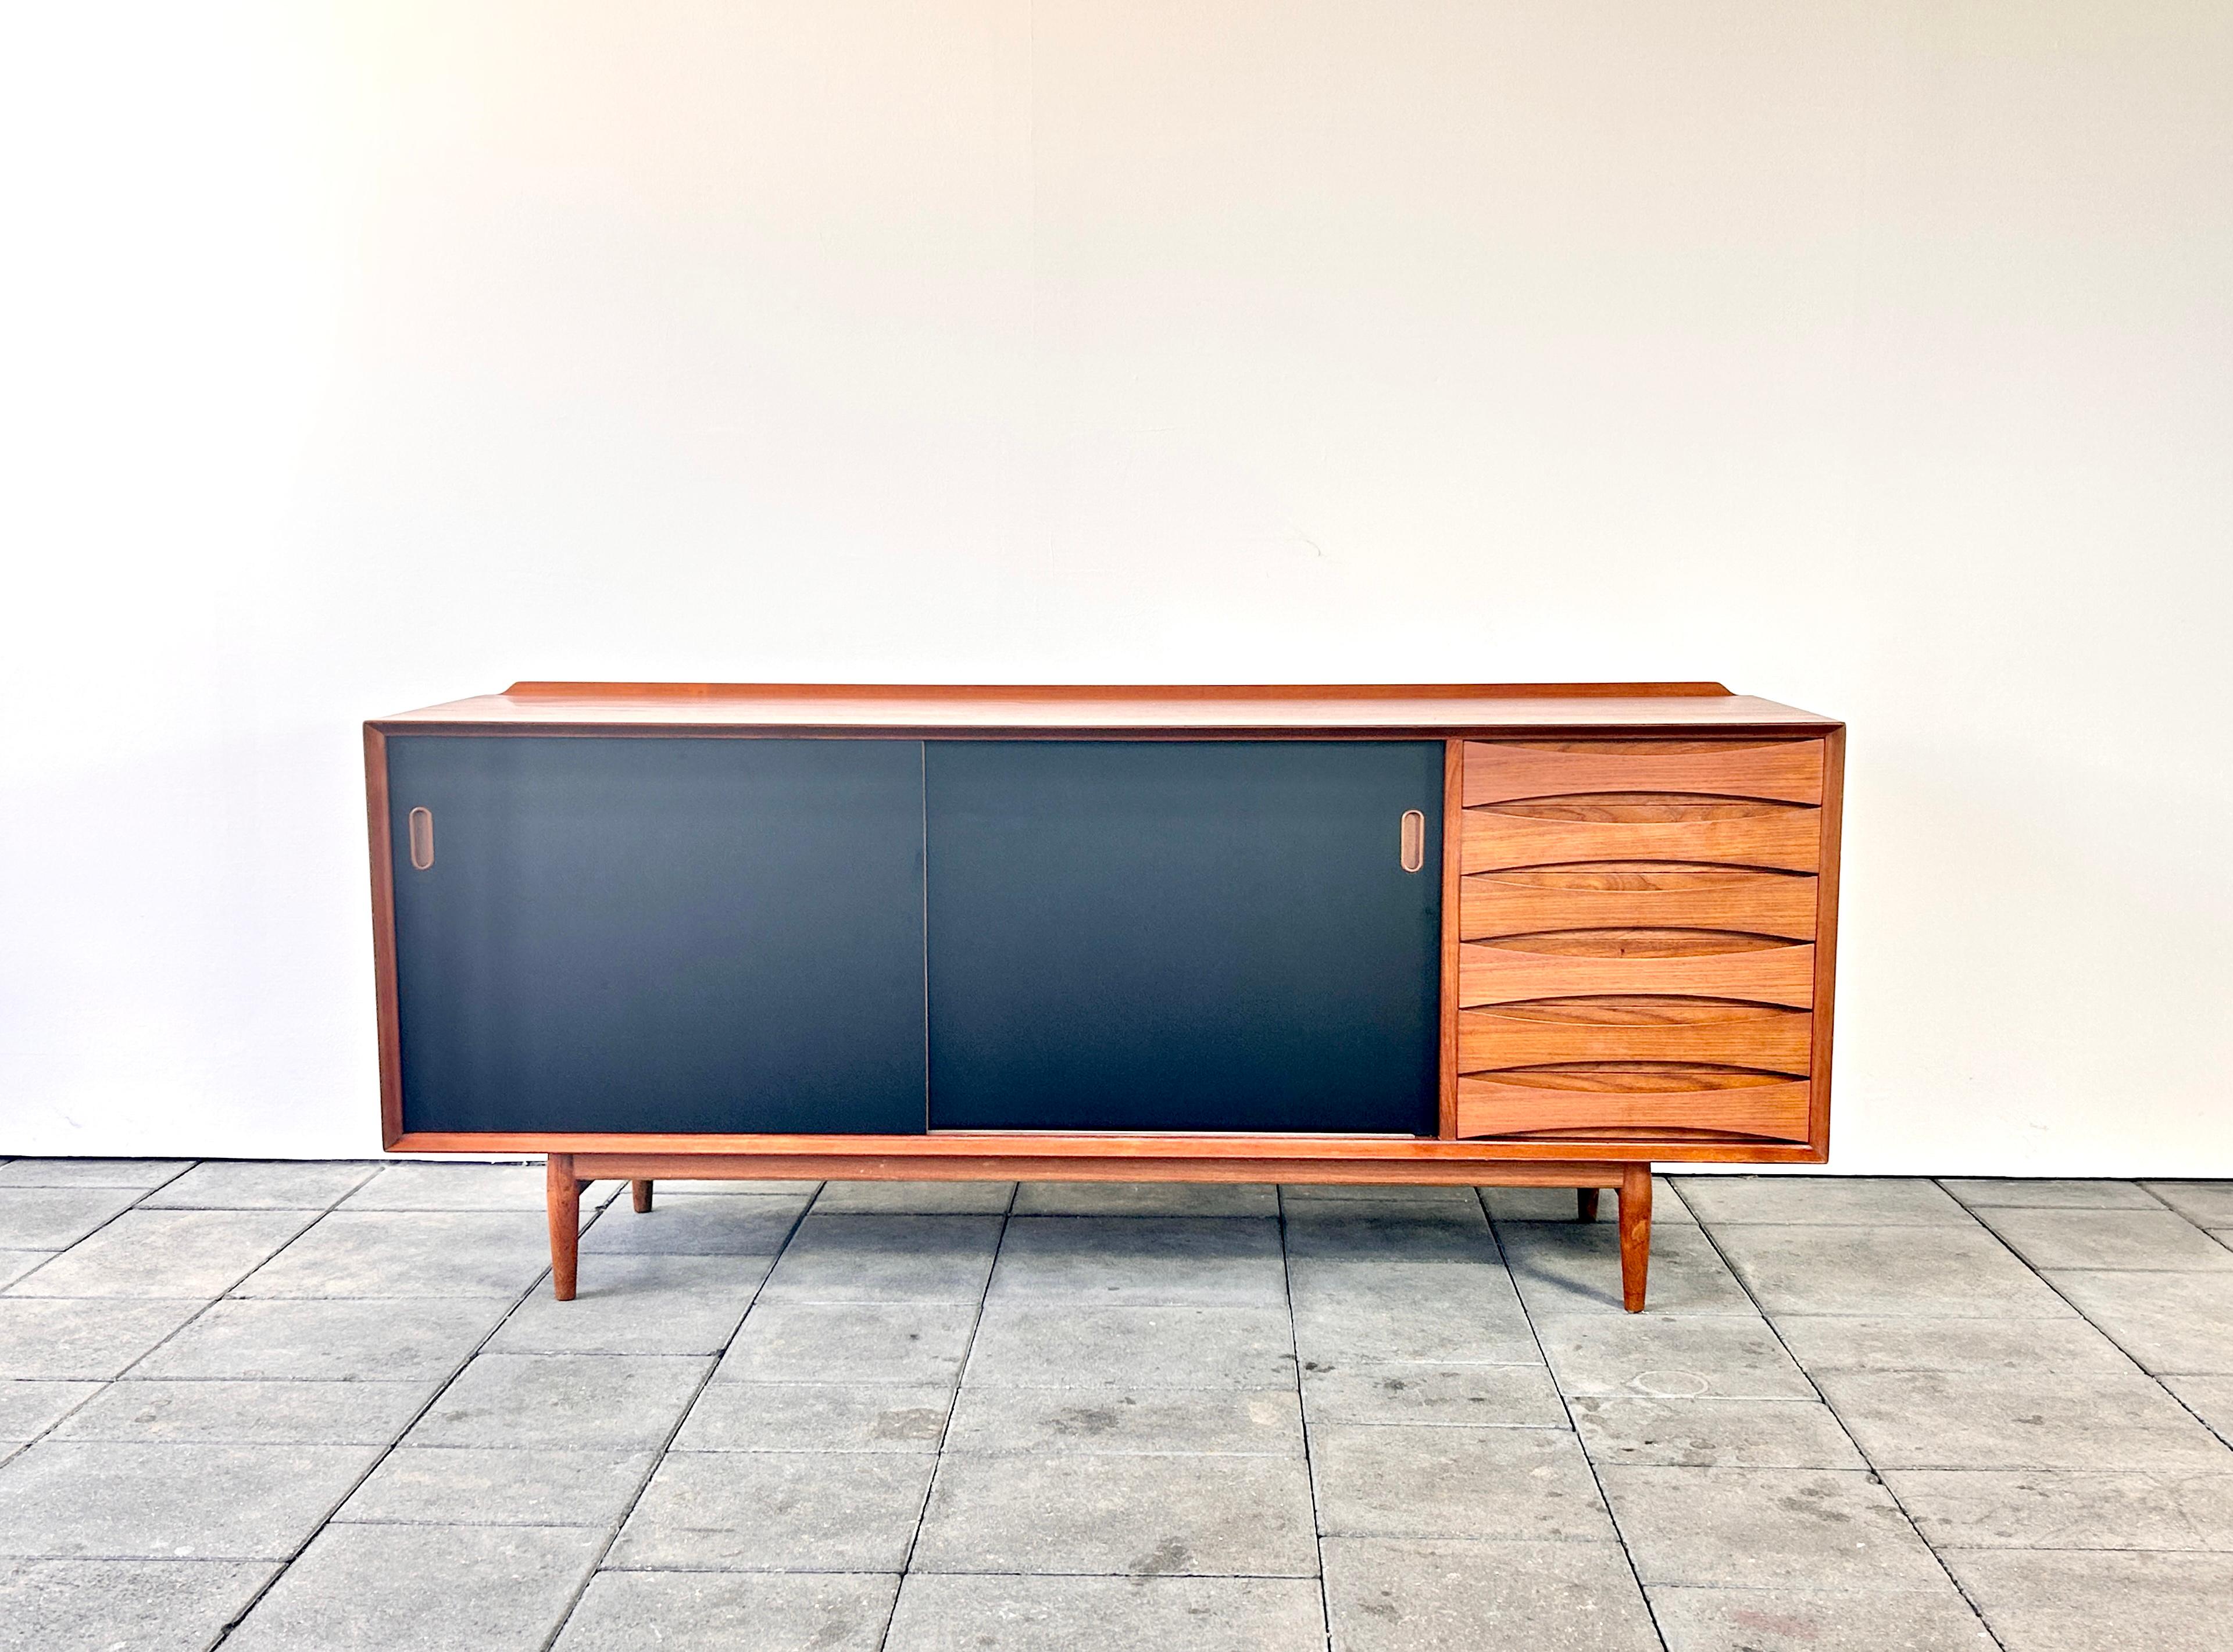 OS29 sideboard designed by Arne Vodder for Sibast furniture, 1959

The Triennale series is certainly one of the most reknown pieces designed by the famous Dane Arne Vodder. Made of solid teak wood (outline profiles, drawers, base and Teak verneer